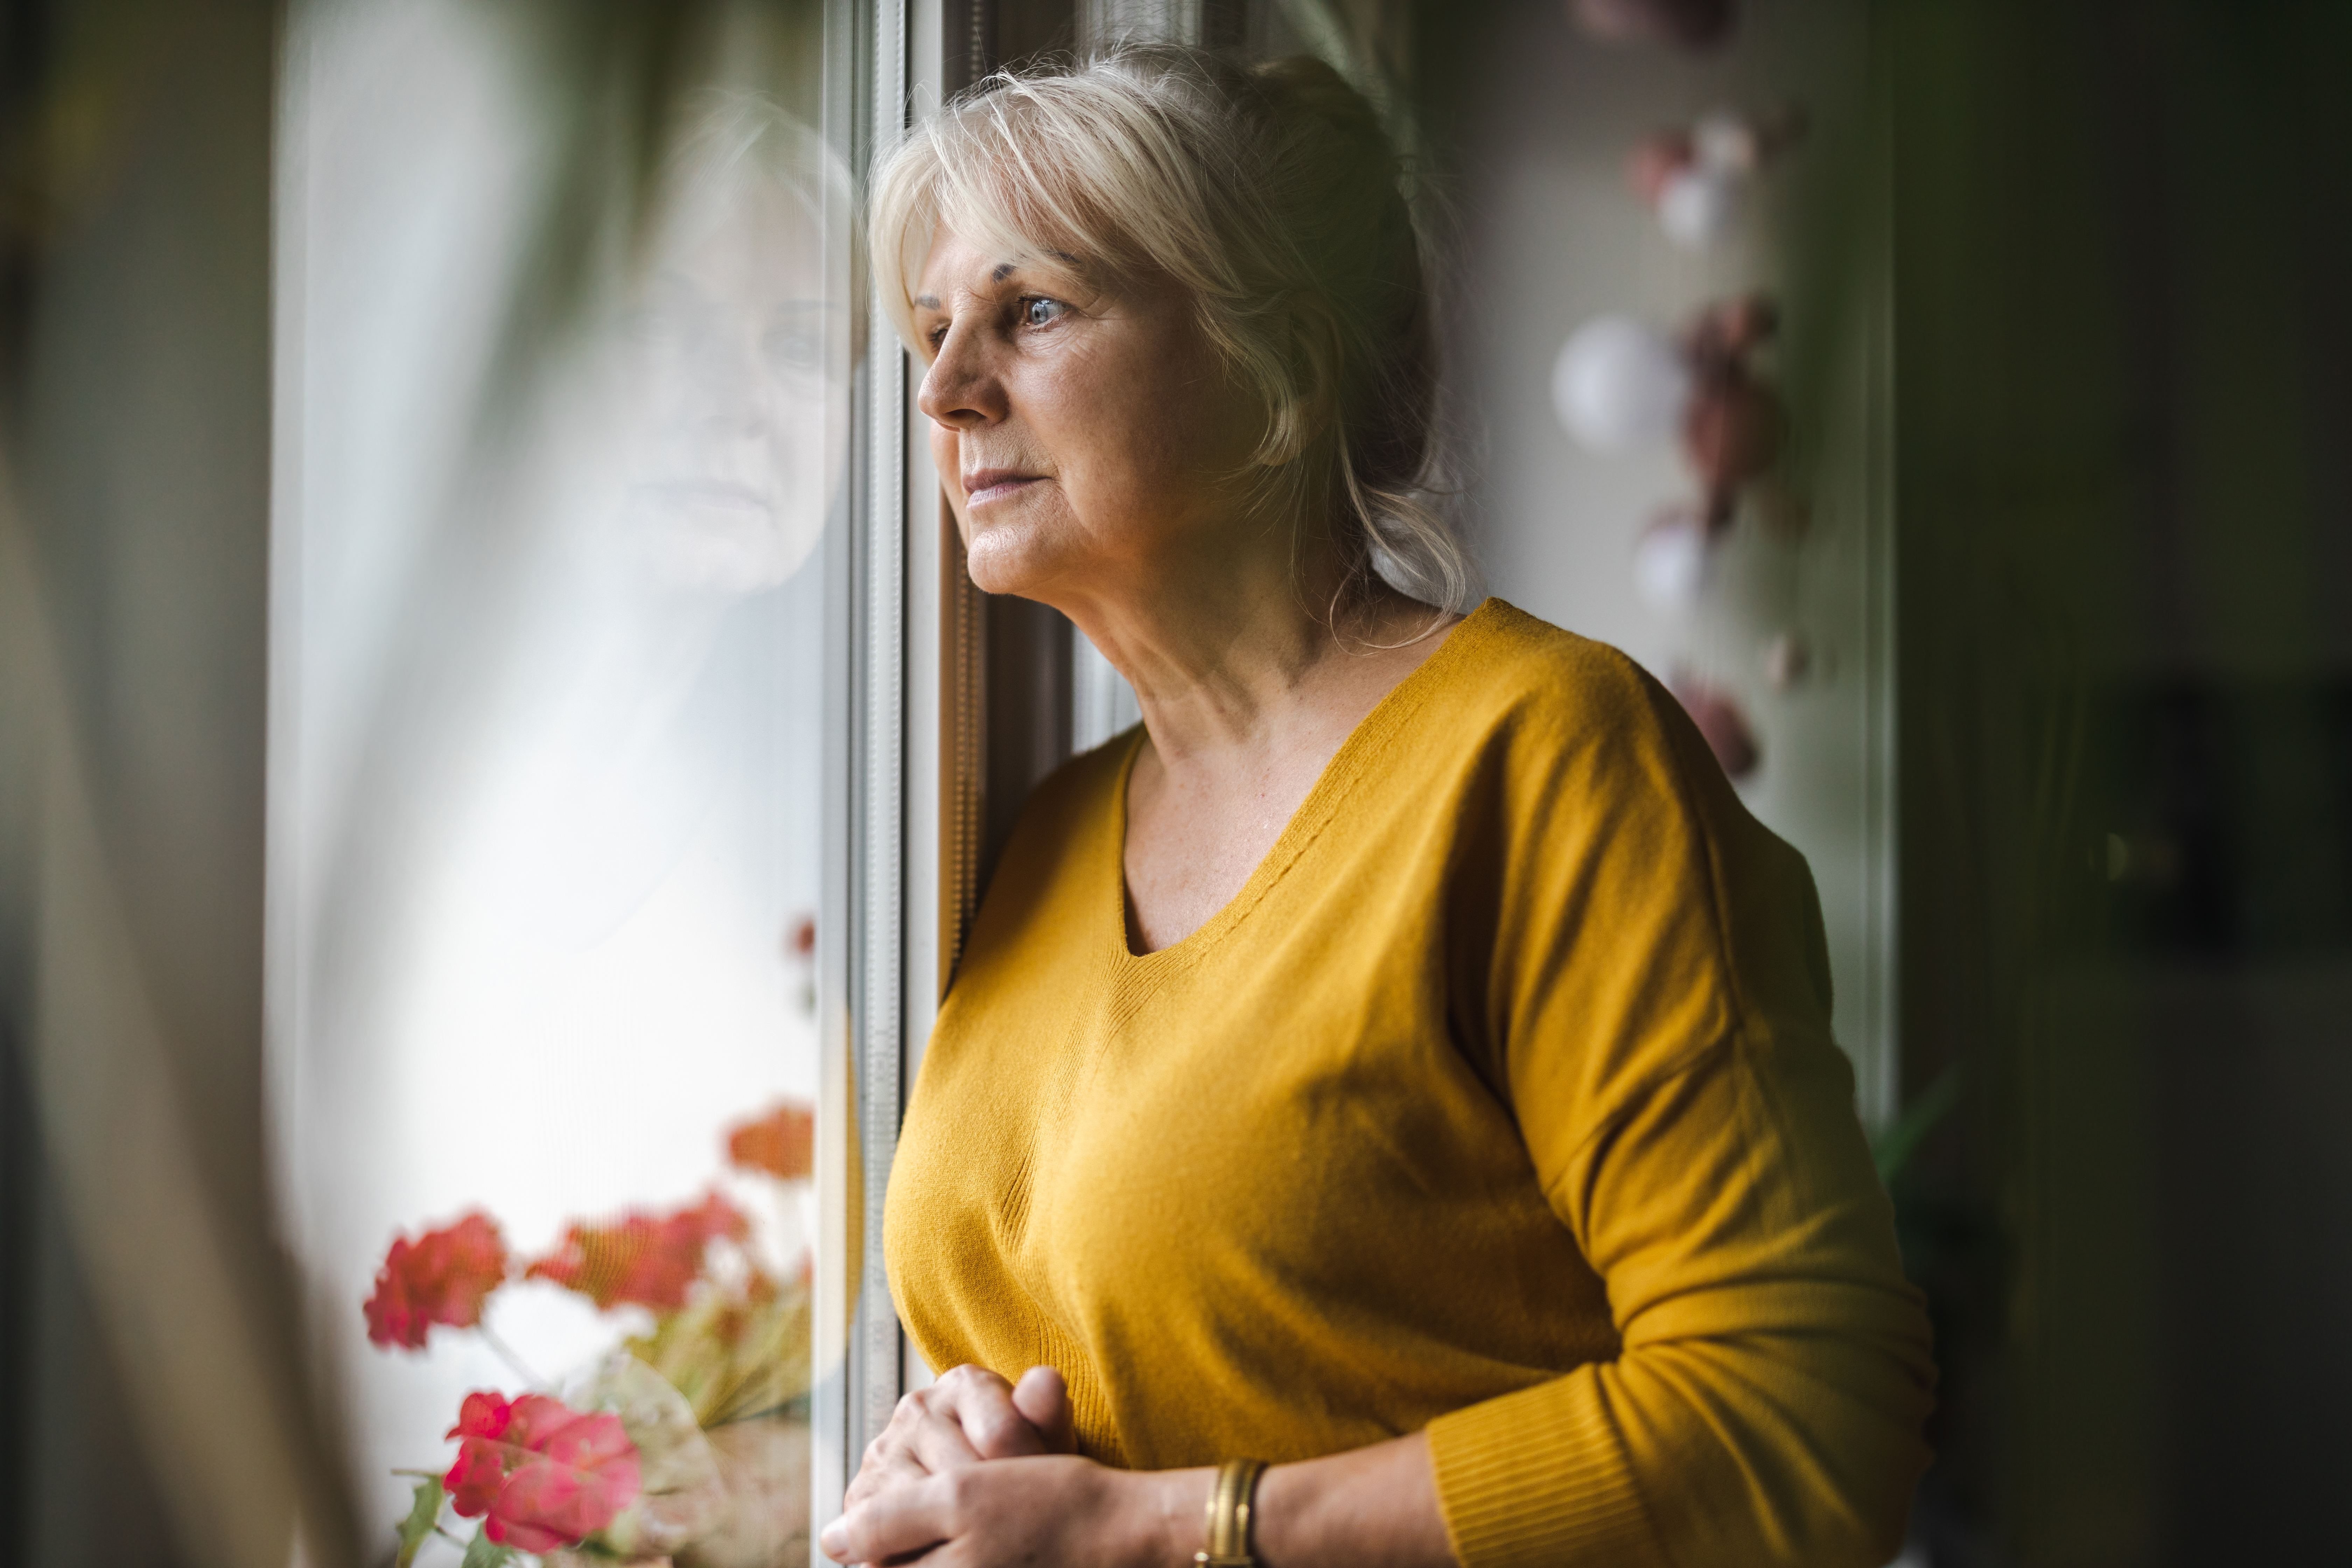 An older woman wearing a yellow jumper looking out of a window.